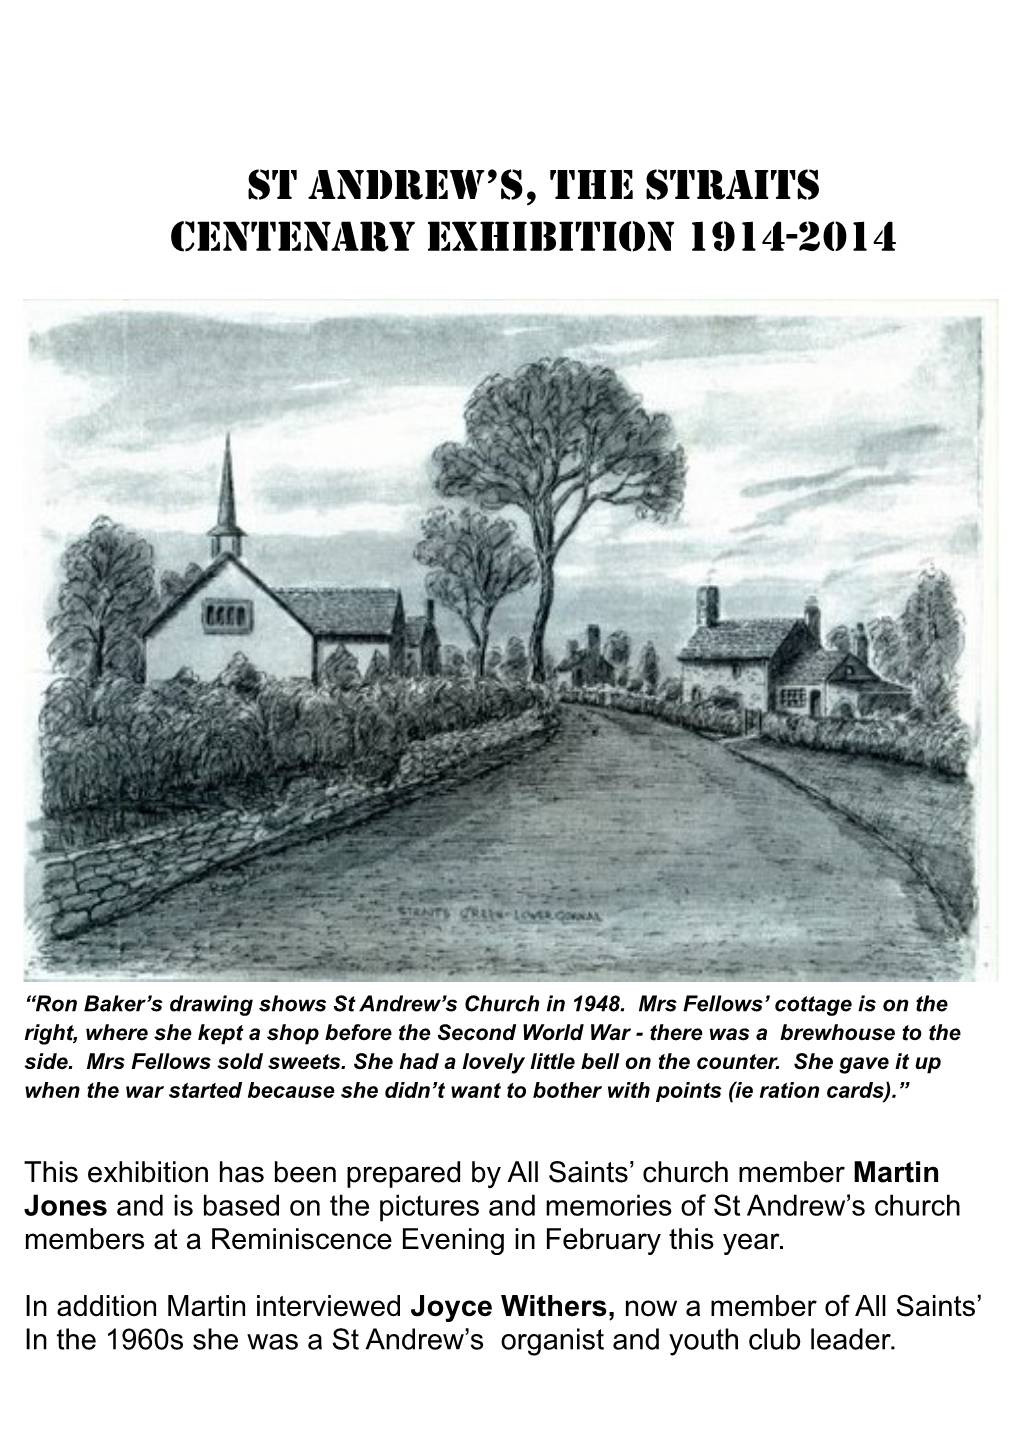 This Exhibition Has Been Prepared by All Saints' Church Member Martin Jones and Is Based on the Pictures and Memories of St An